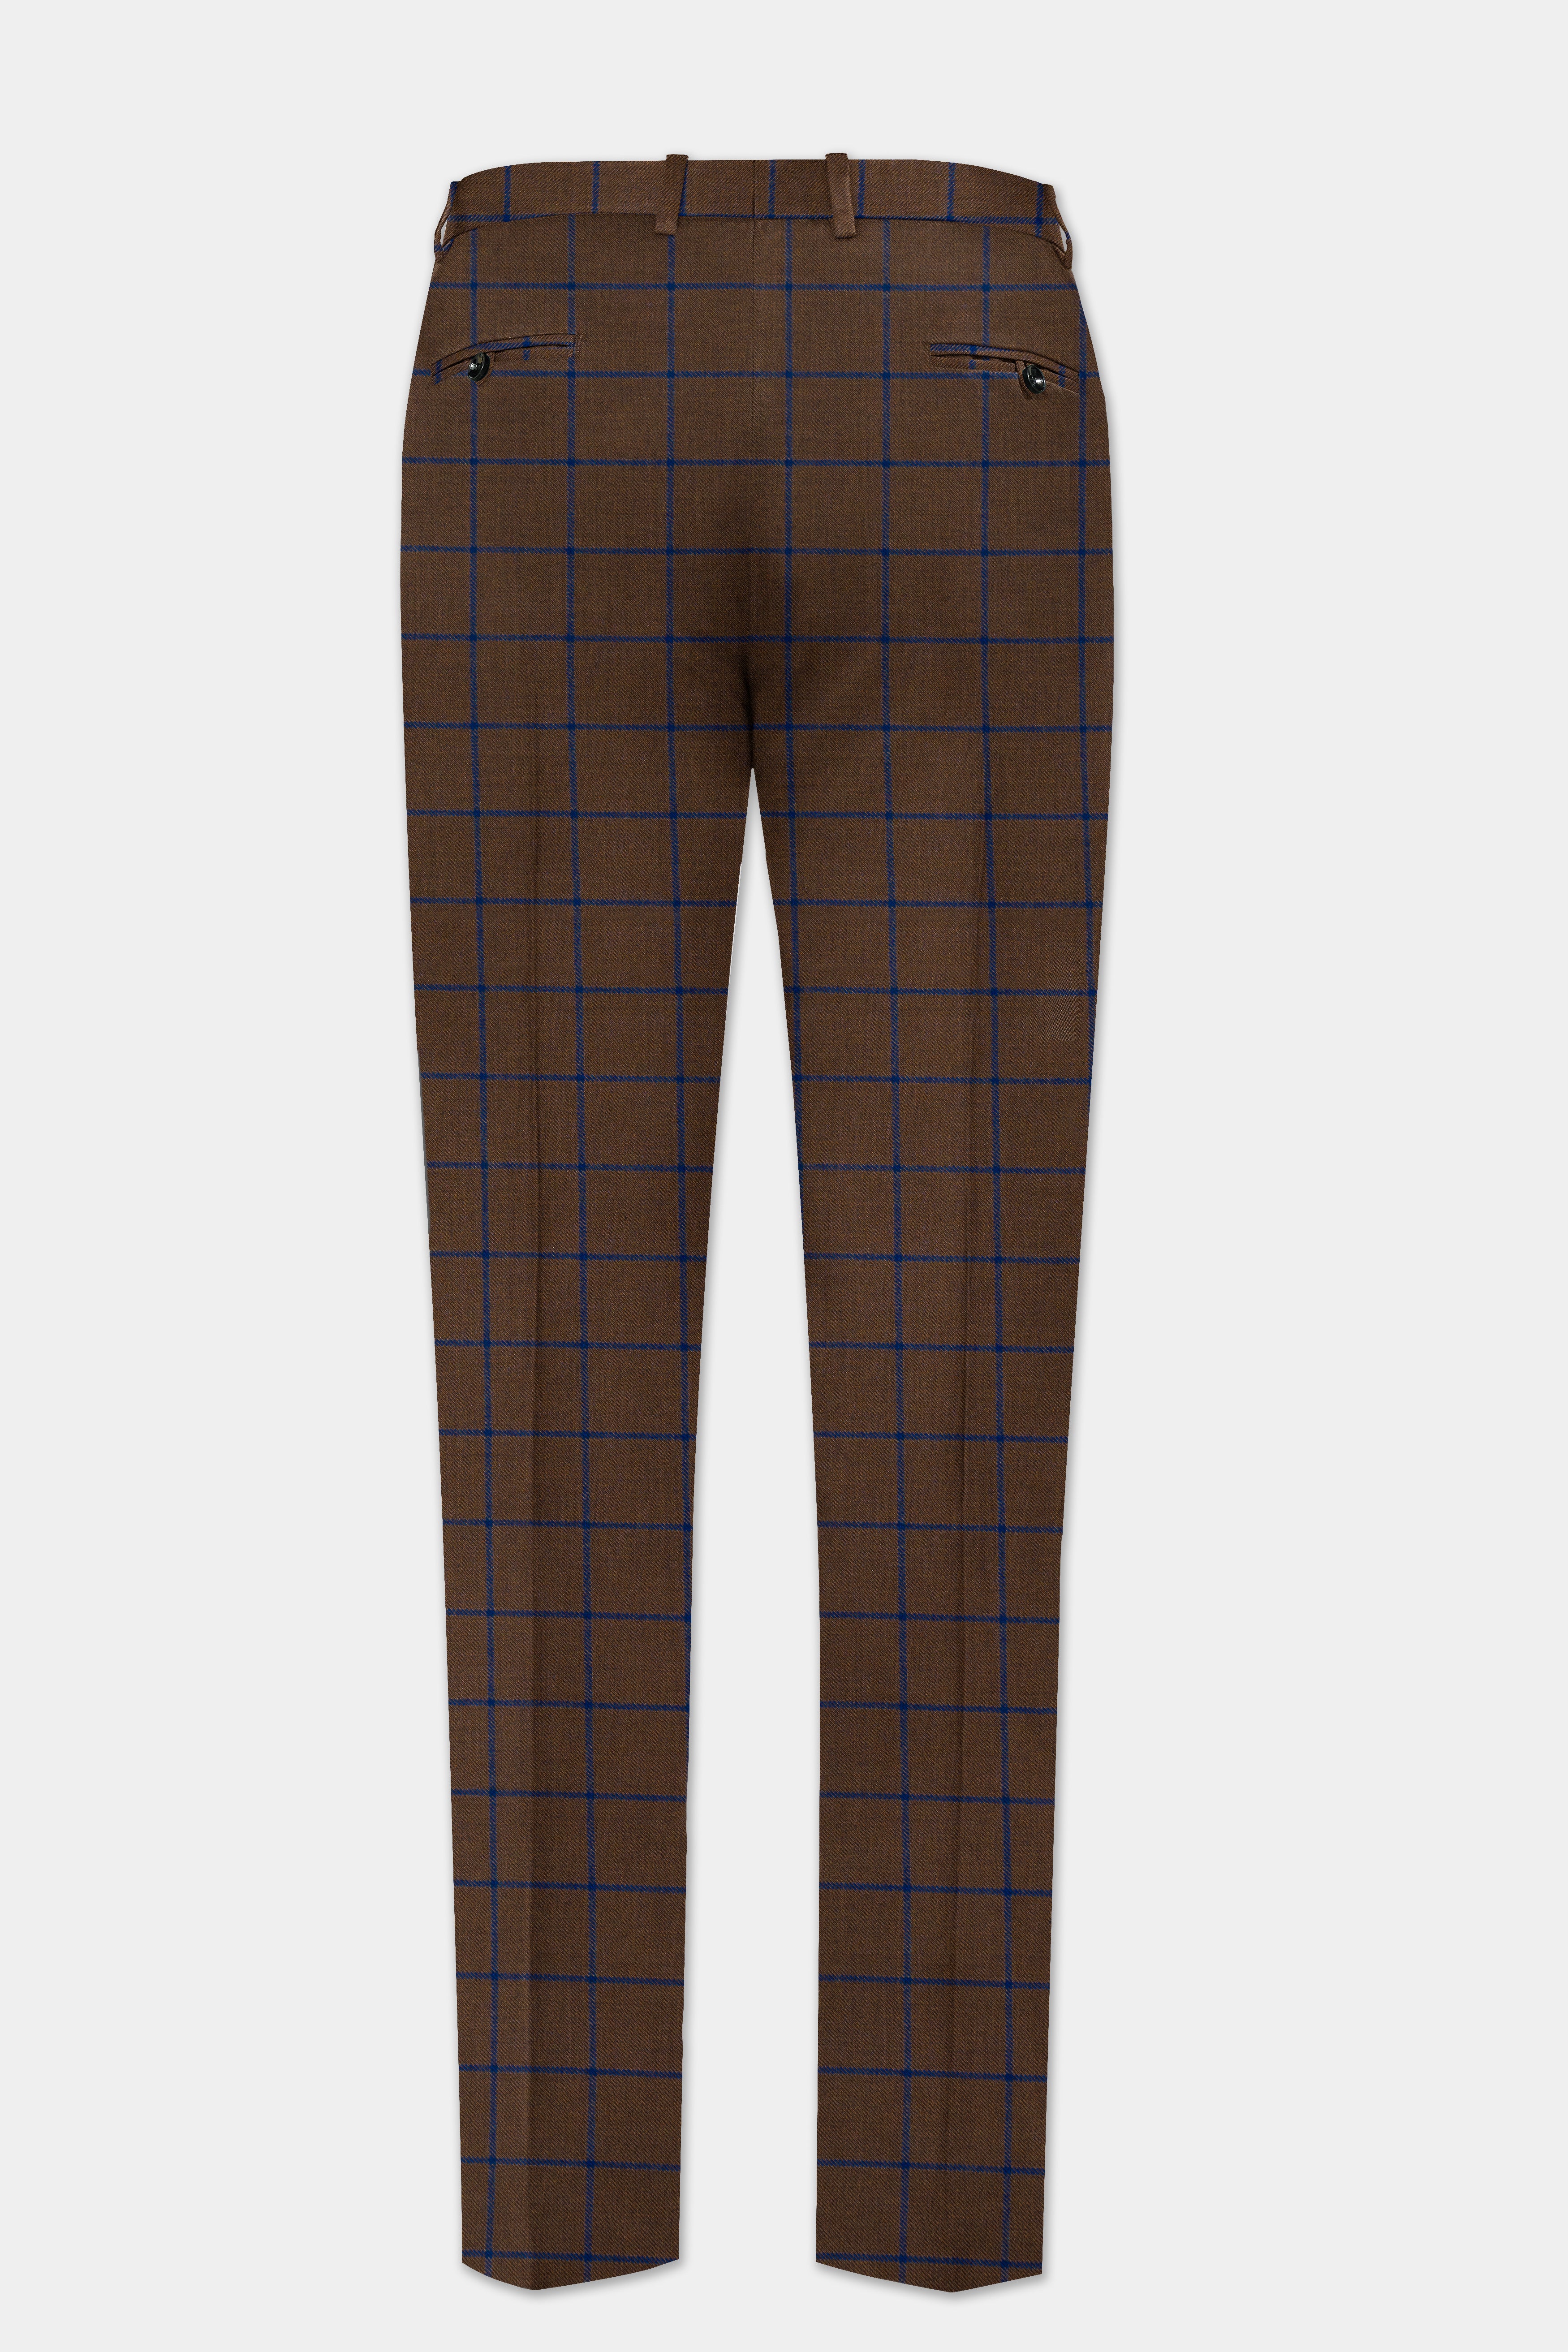 Bistre Brown with Catalina Blue Windowpane Bandhgala Tweed Suit